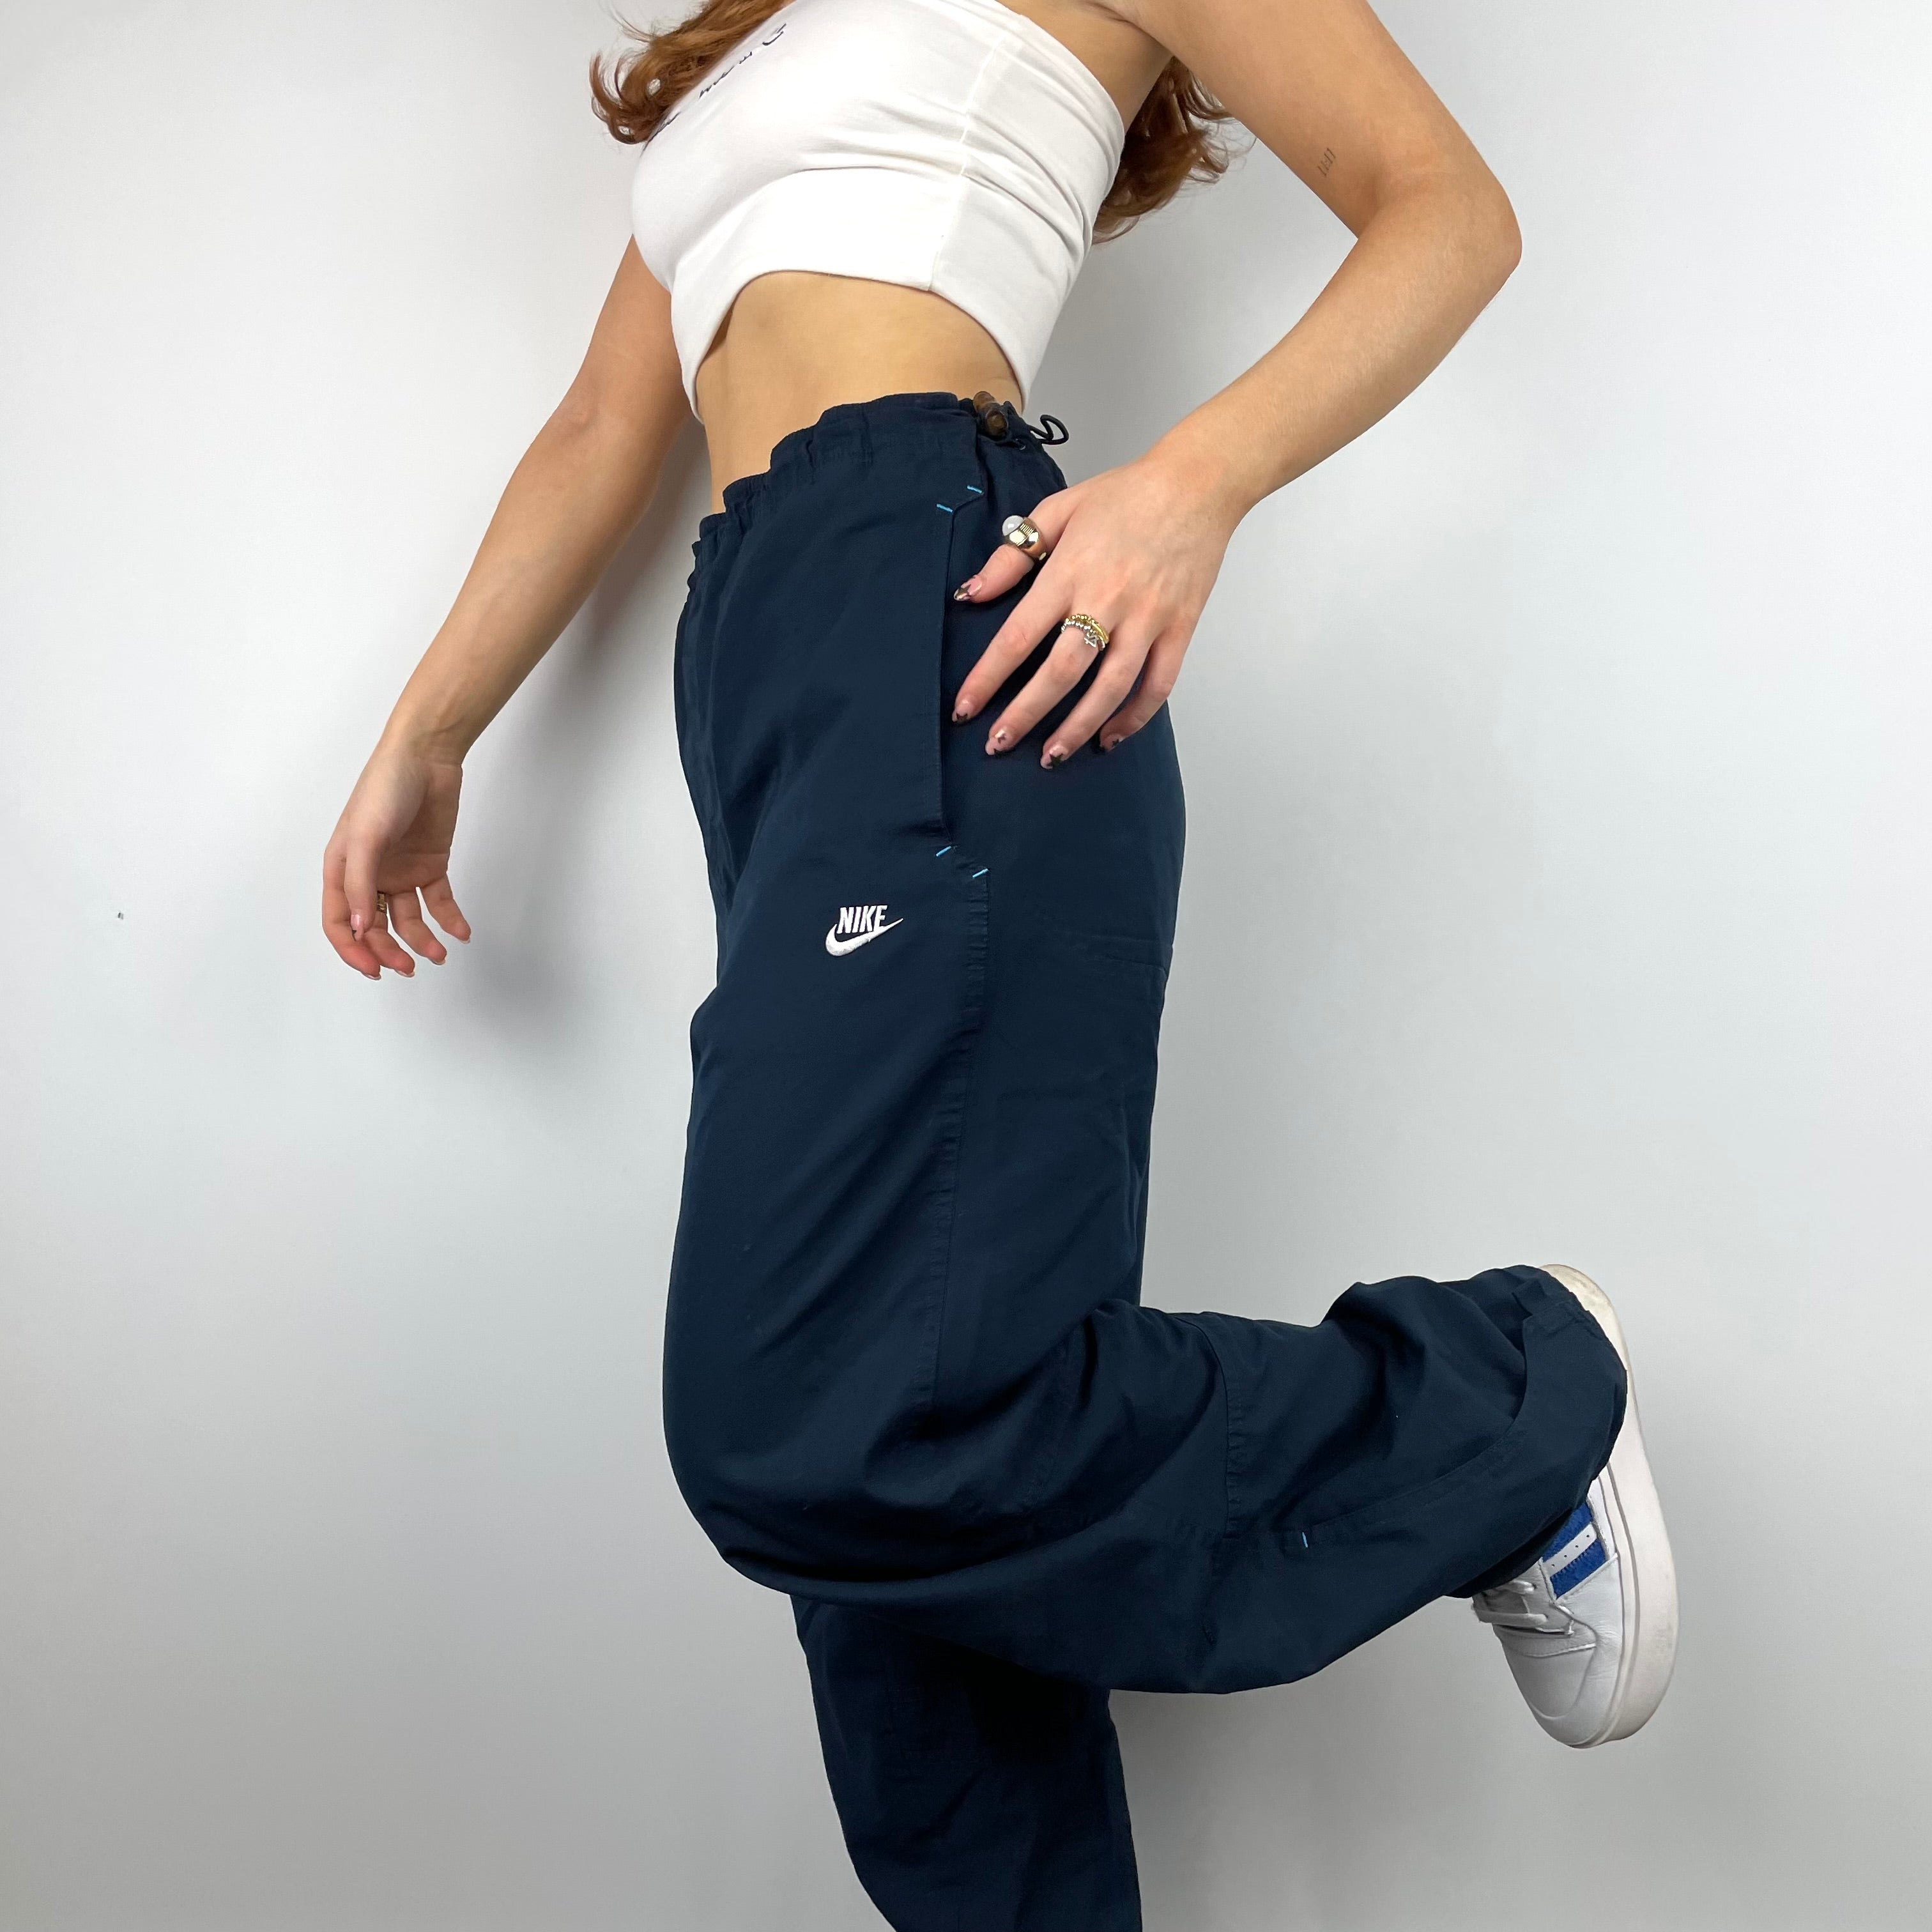 Nike Navy Embroidered Spell Out Track Pants (L)